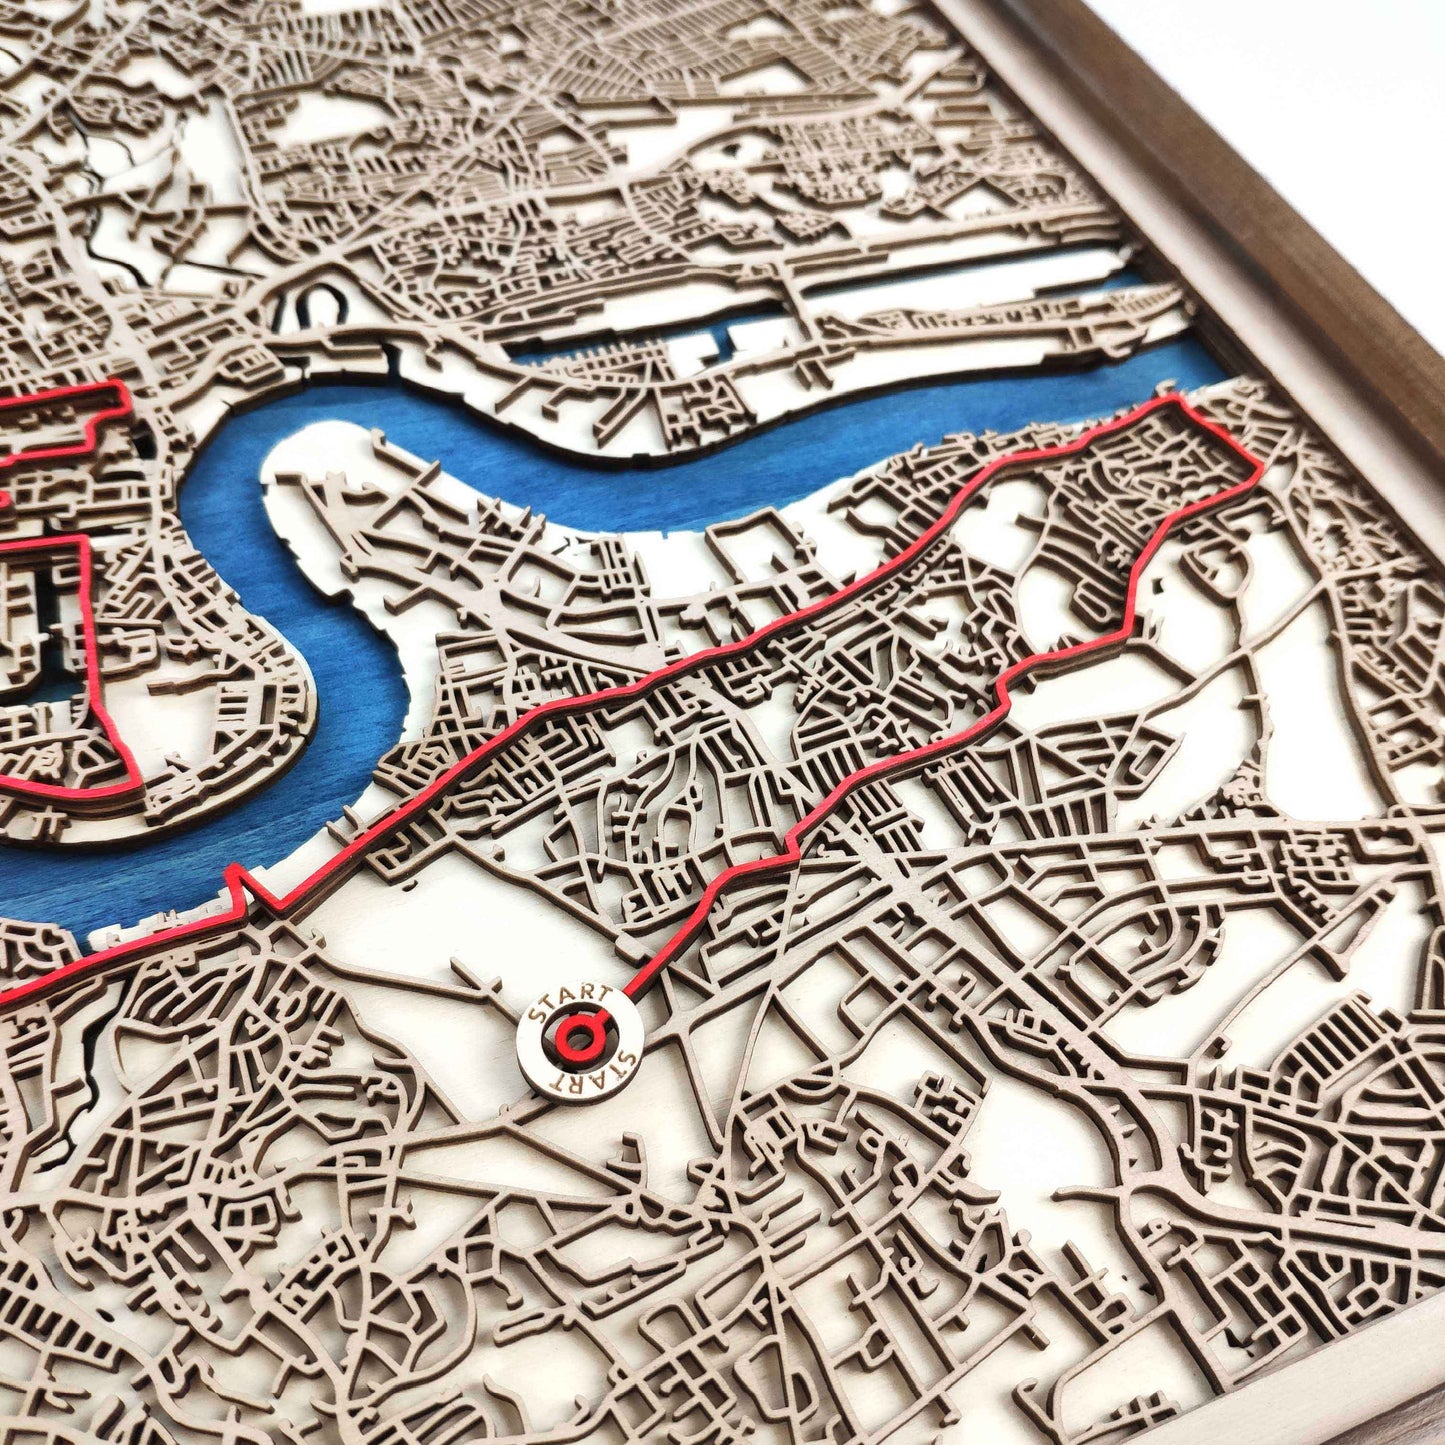 London Marathon Commemorative Wooden Route Map – Collector's Item by CityWood - Custom Wood Map Art - Unique Laser Cut Engraved - Anniversary Gift